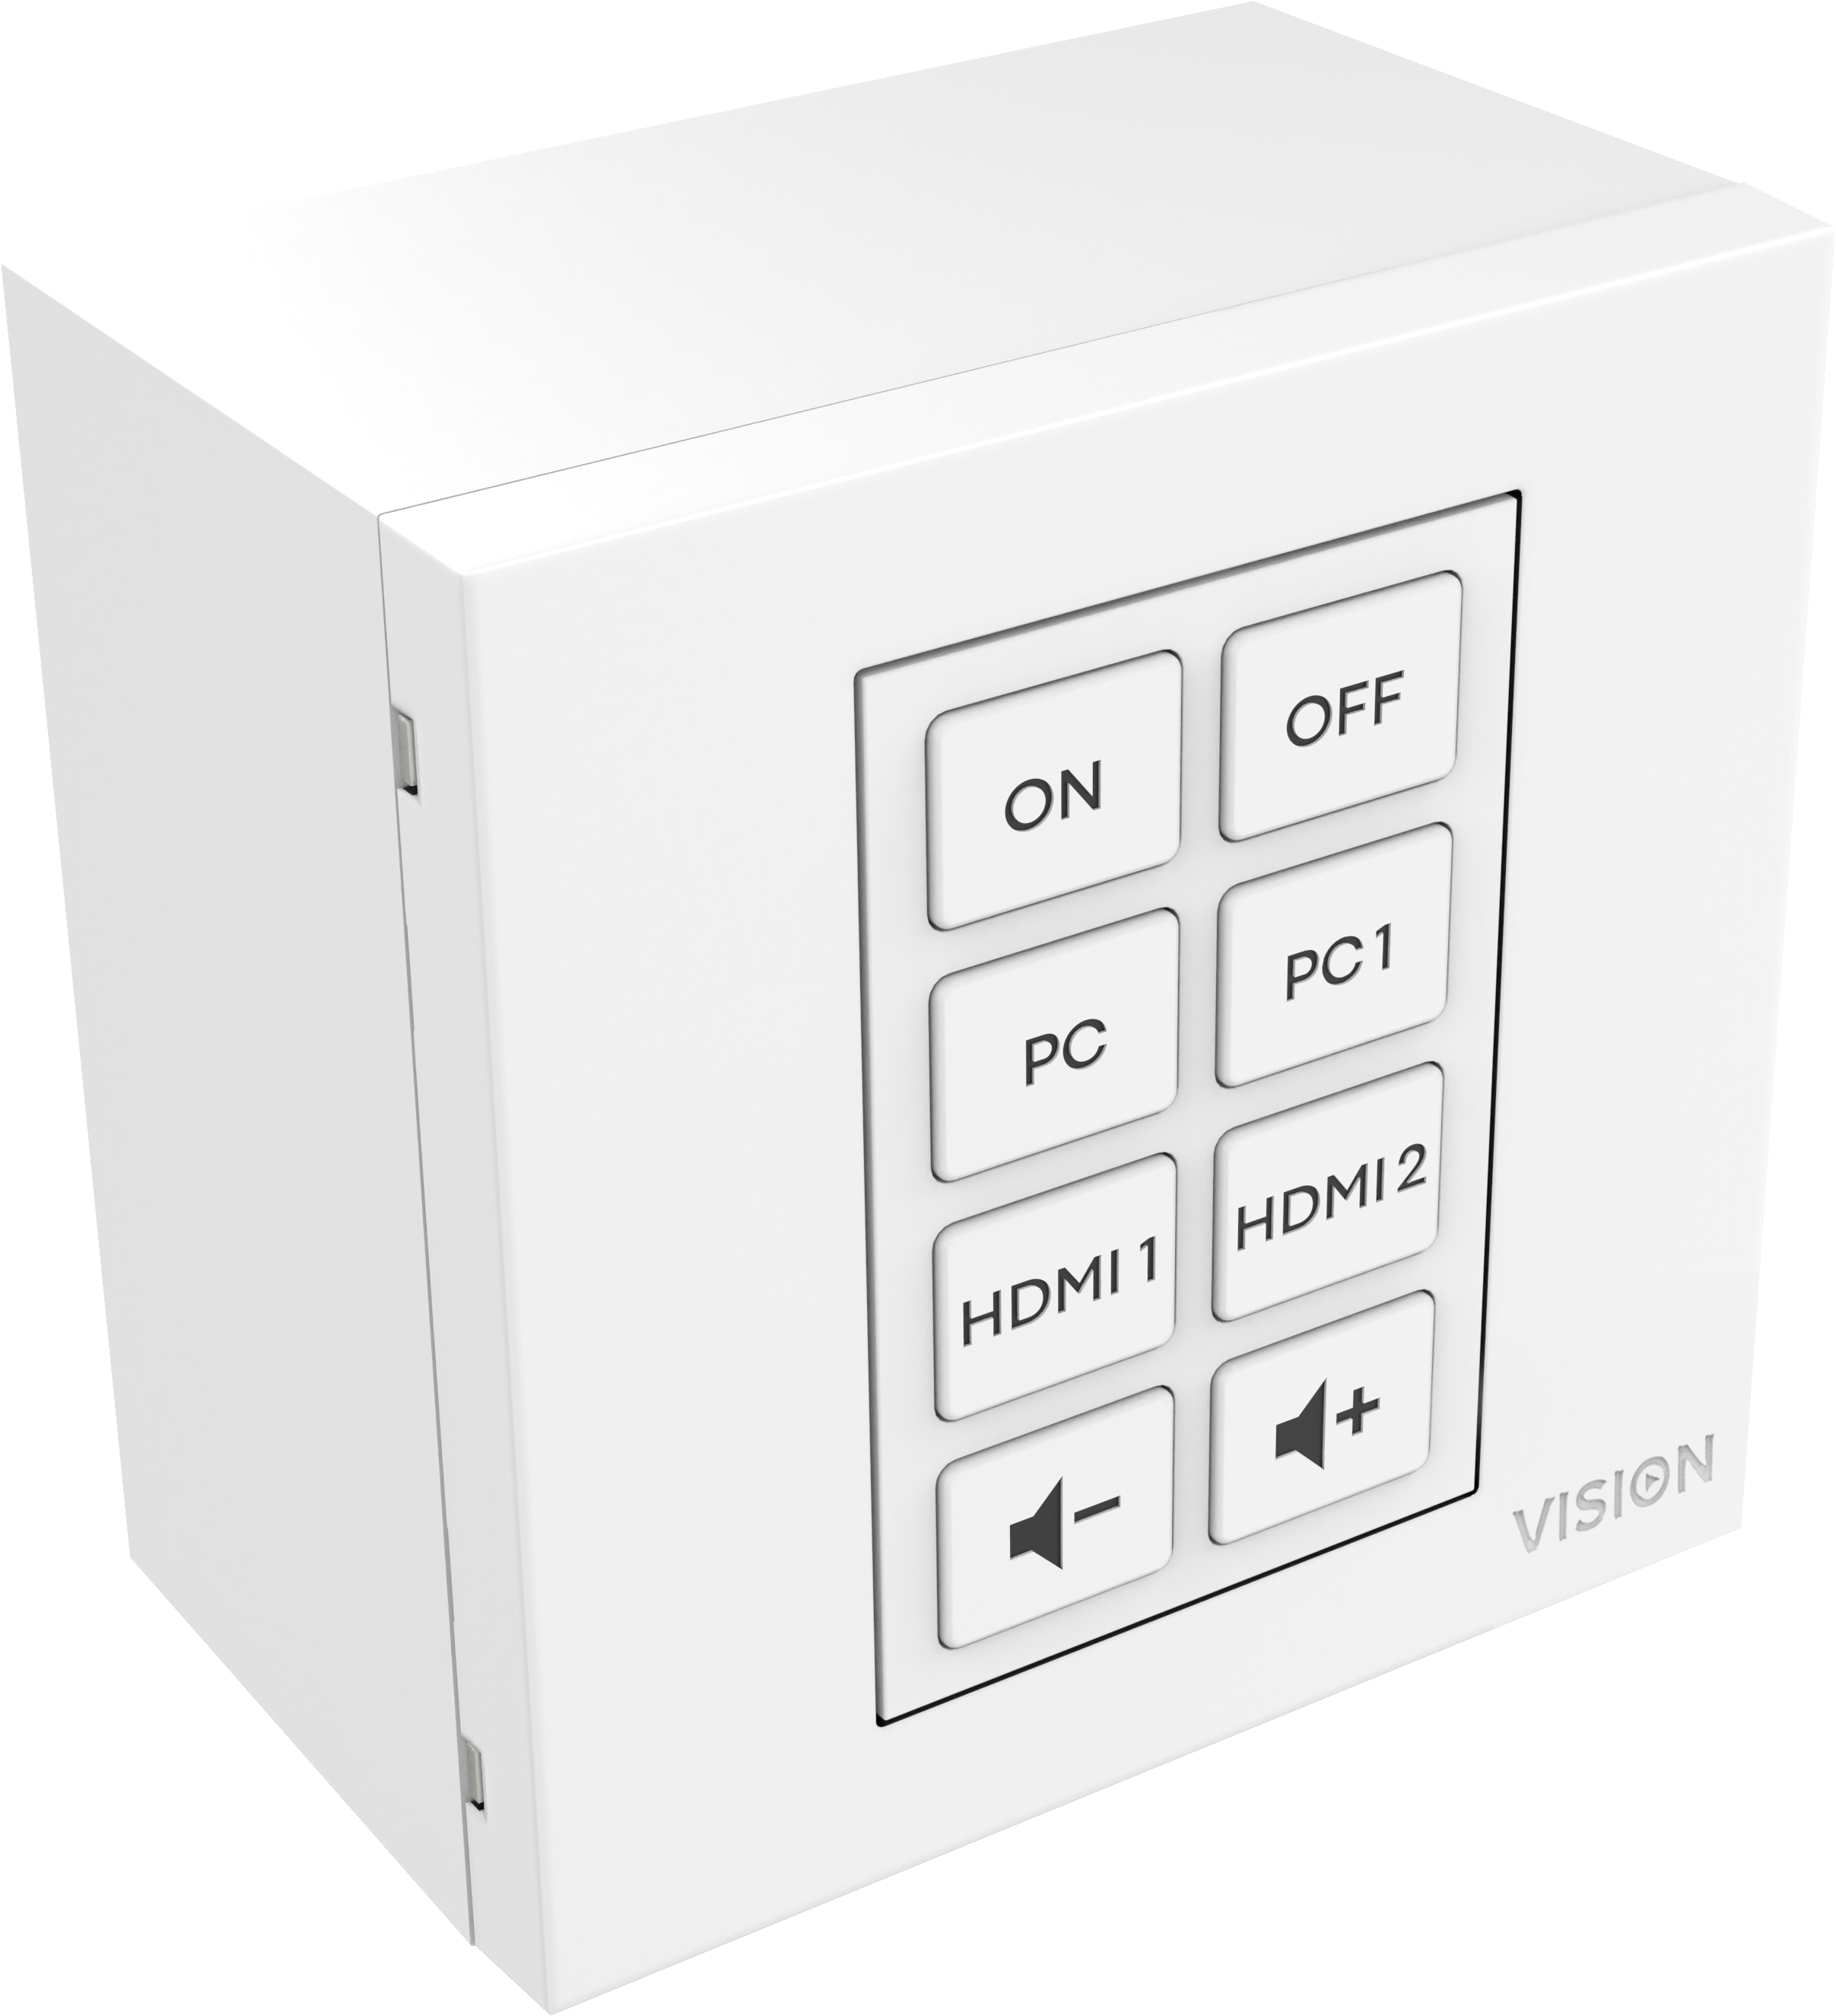 An image showing Control Module